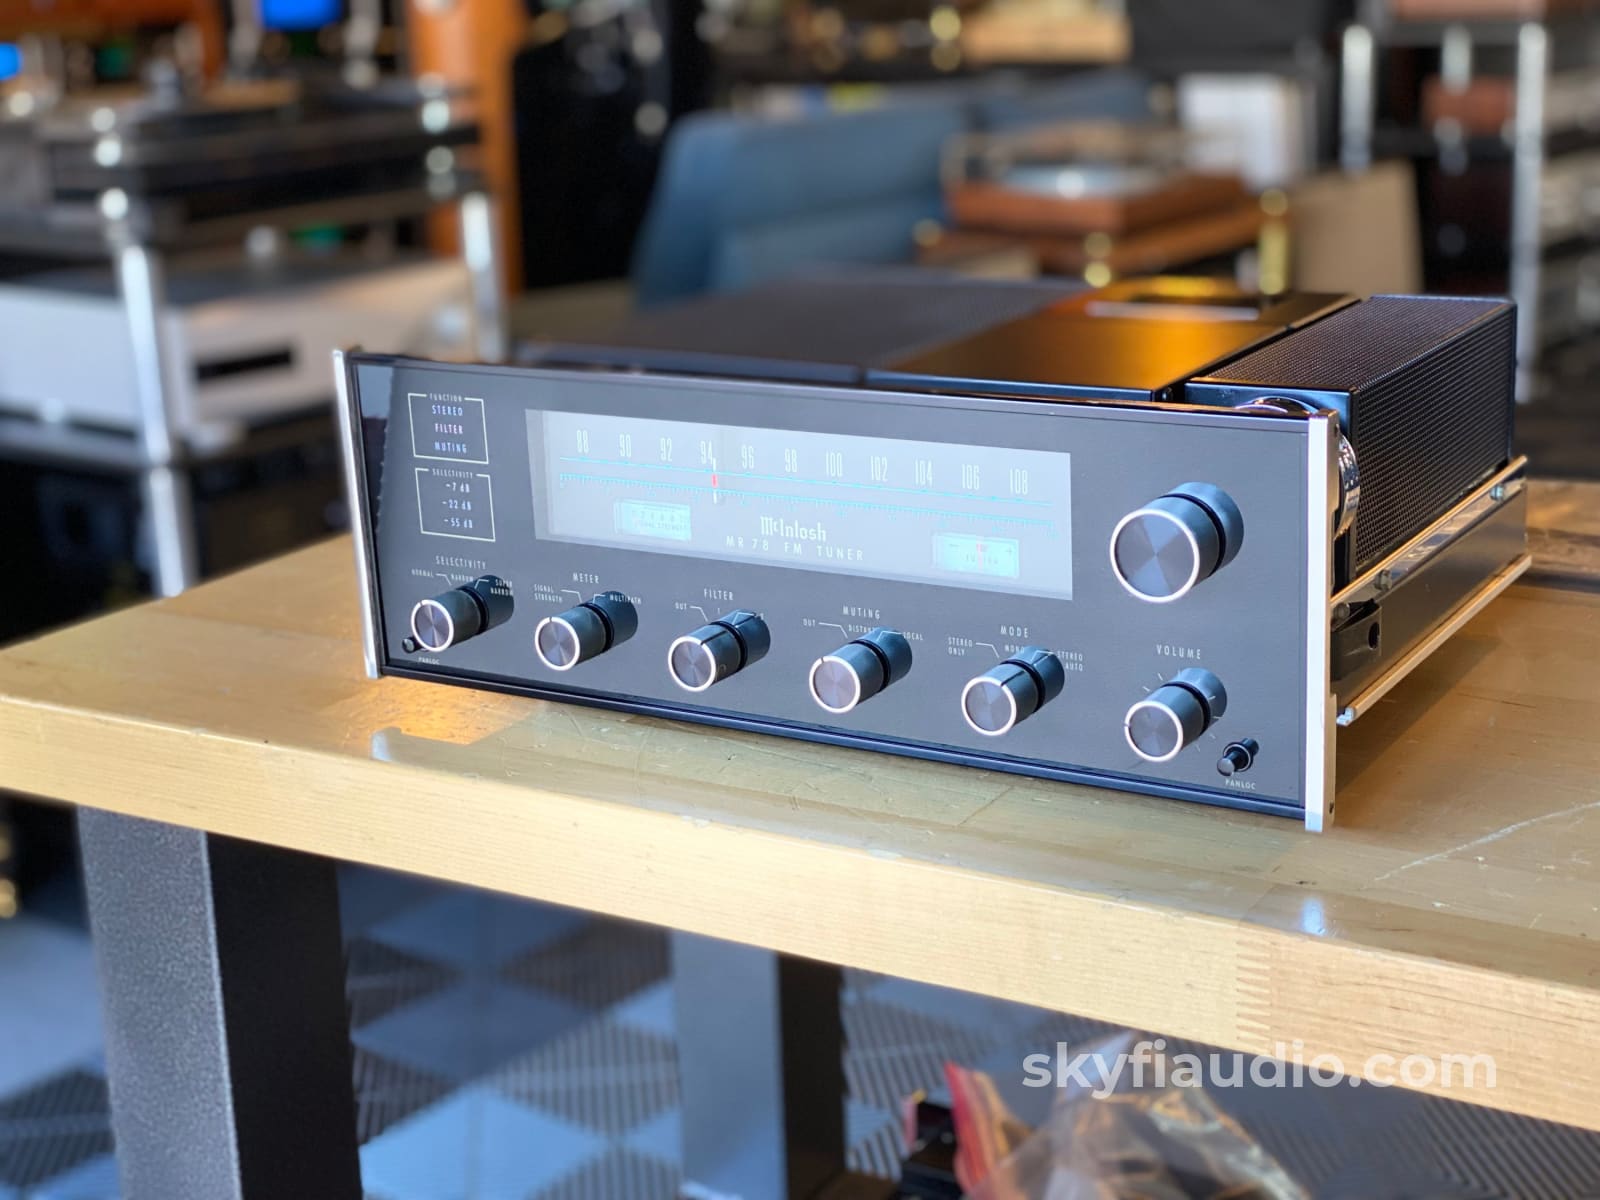 Mcintosh Mr-78 Analog Tuner - The Best From Back In Stock!